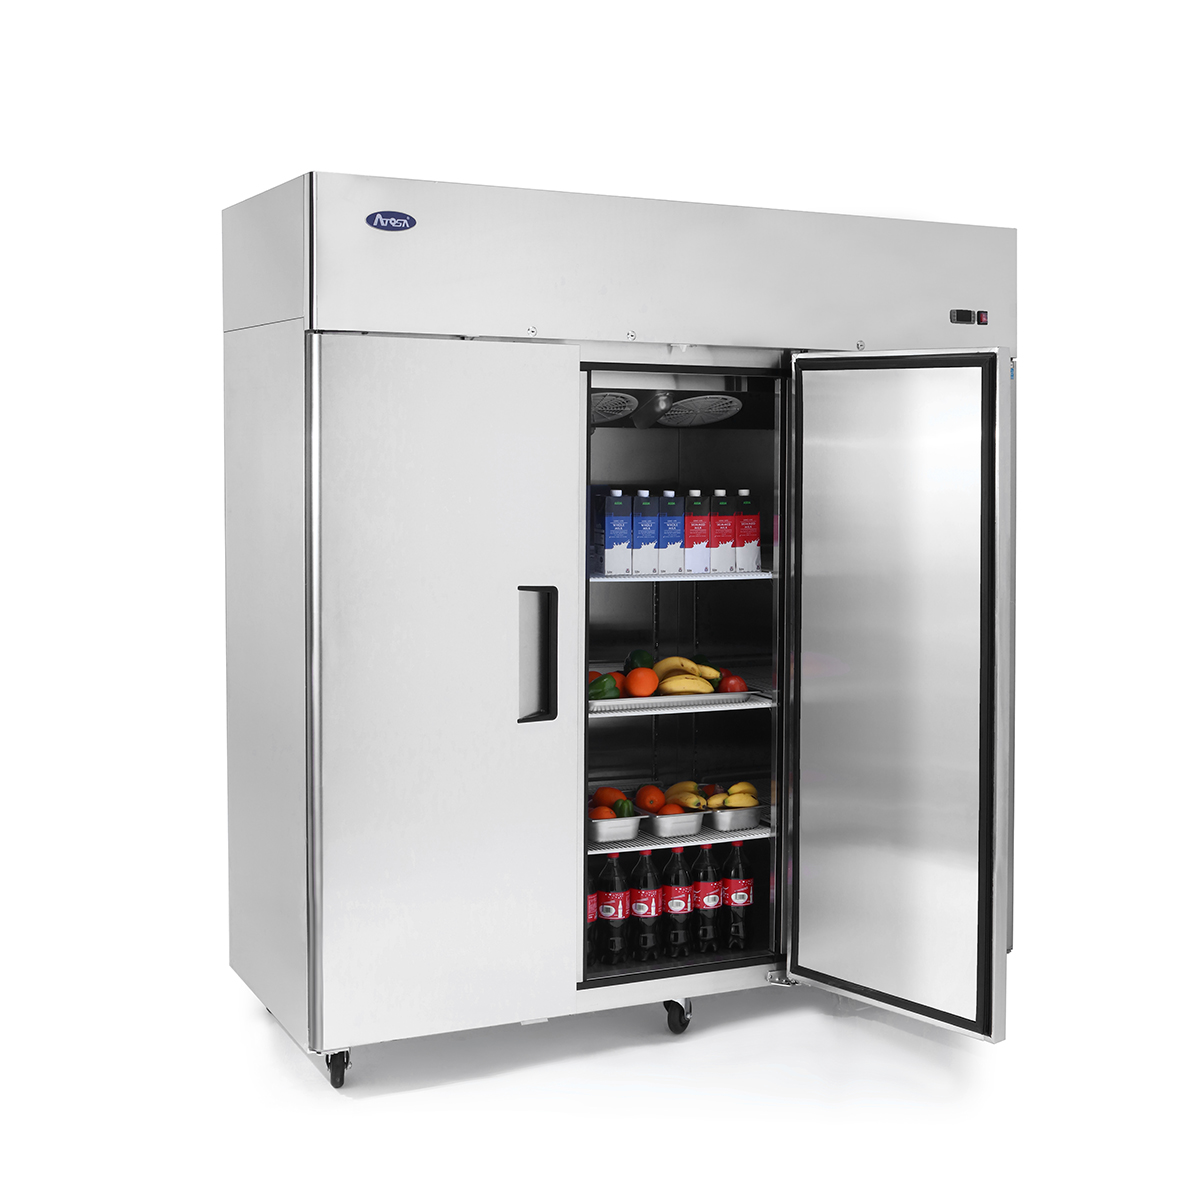 Atosa MBF8003GR Reach-In 3 Section Top Mount Freezer 77-3/4"W x 33-3/4"D x 82-7/8"H with 3 Locking Solid Doors image 1